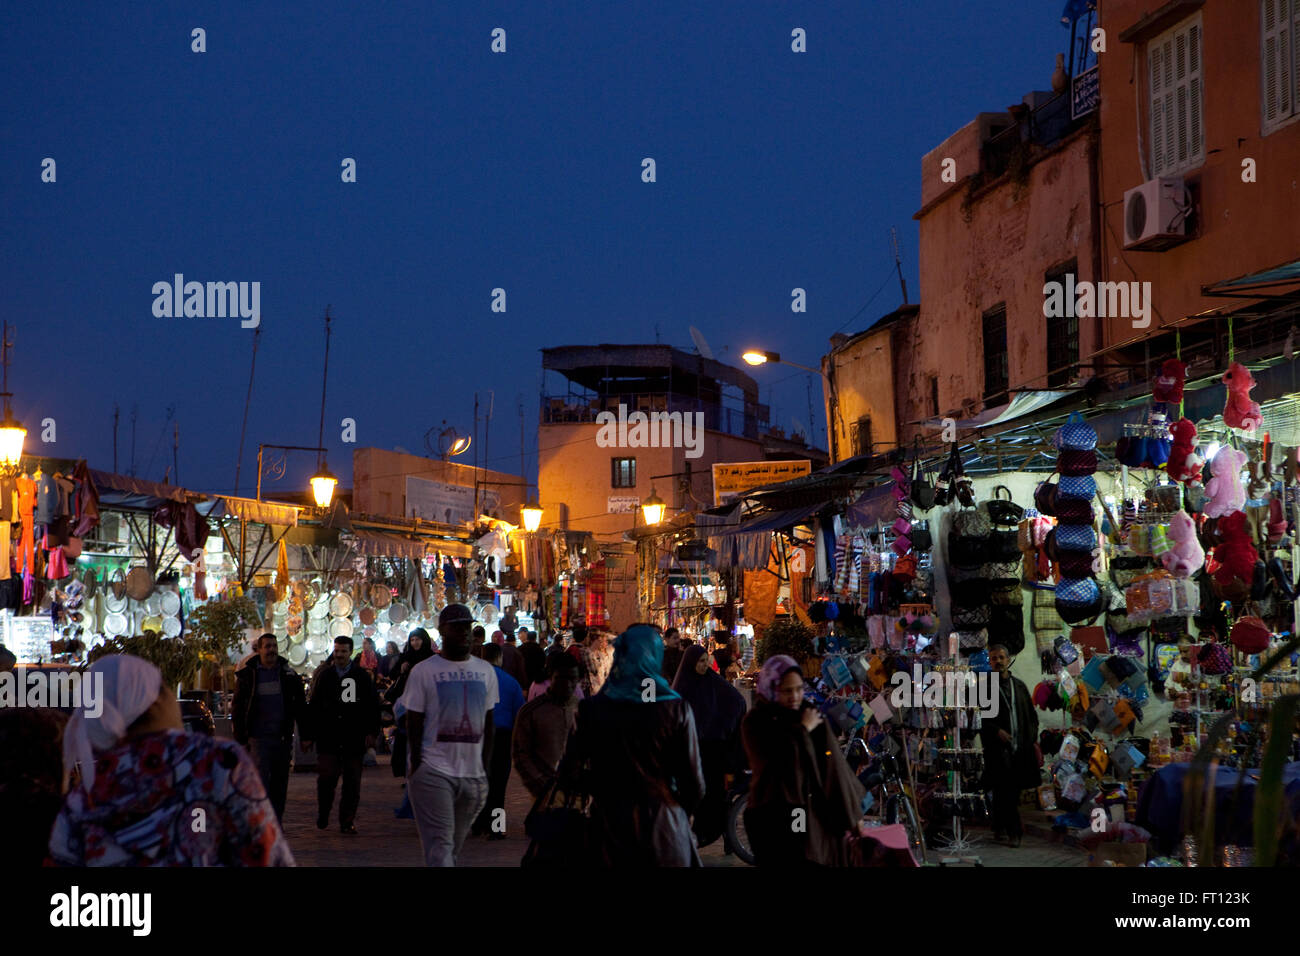 lively scene in the souk at night, Marrakech, Morocco Stock Photo